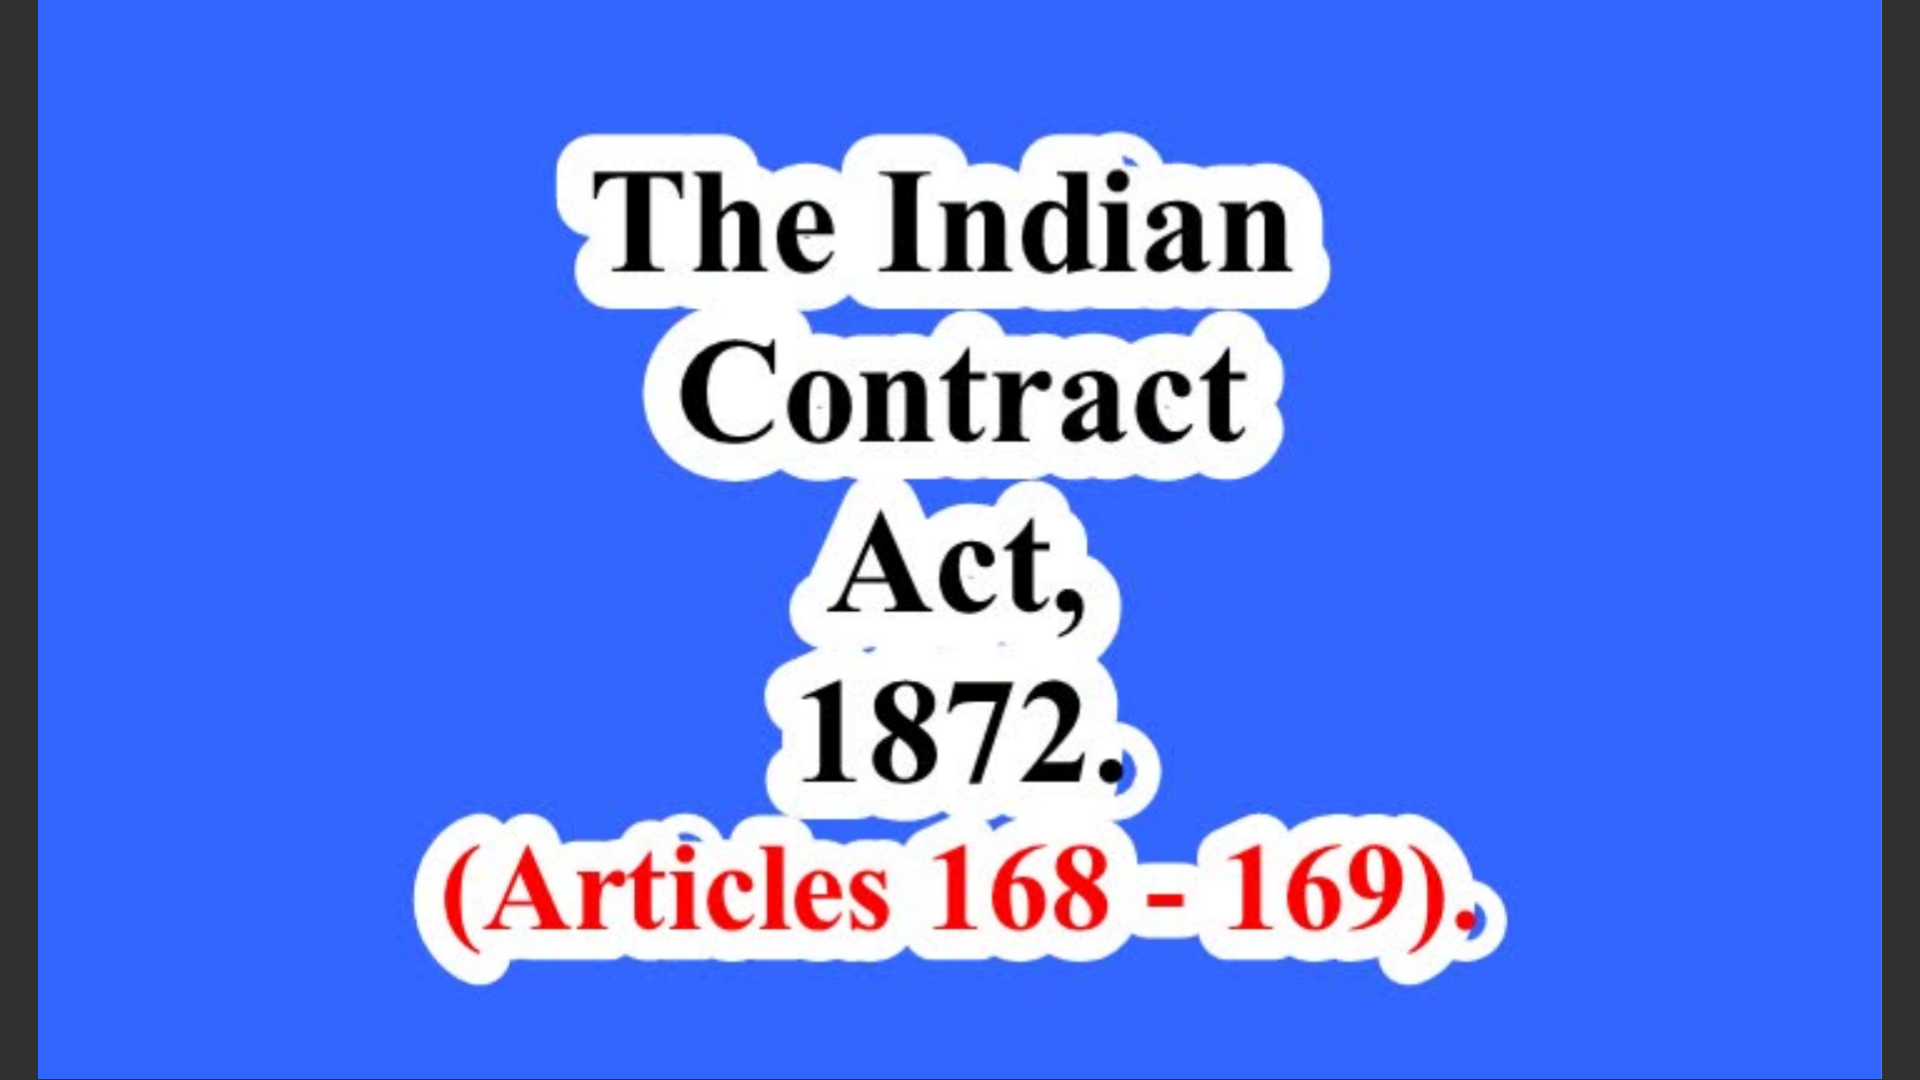 The Indian Contract Act, 1872. (Articles 168 – 169).